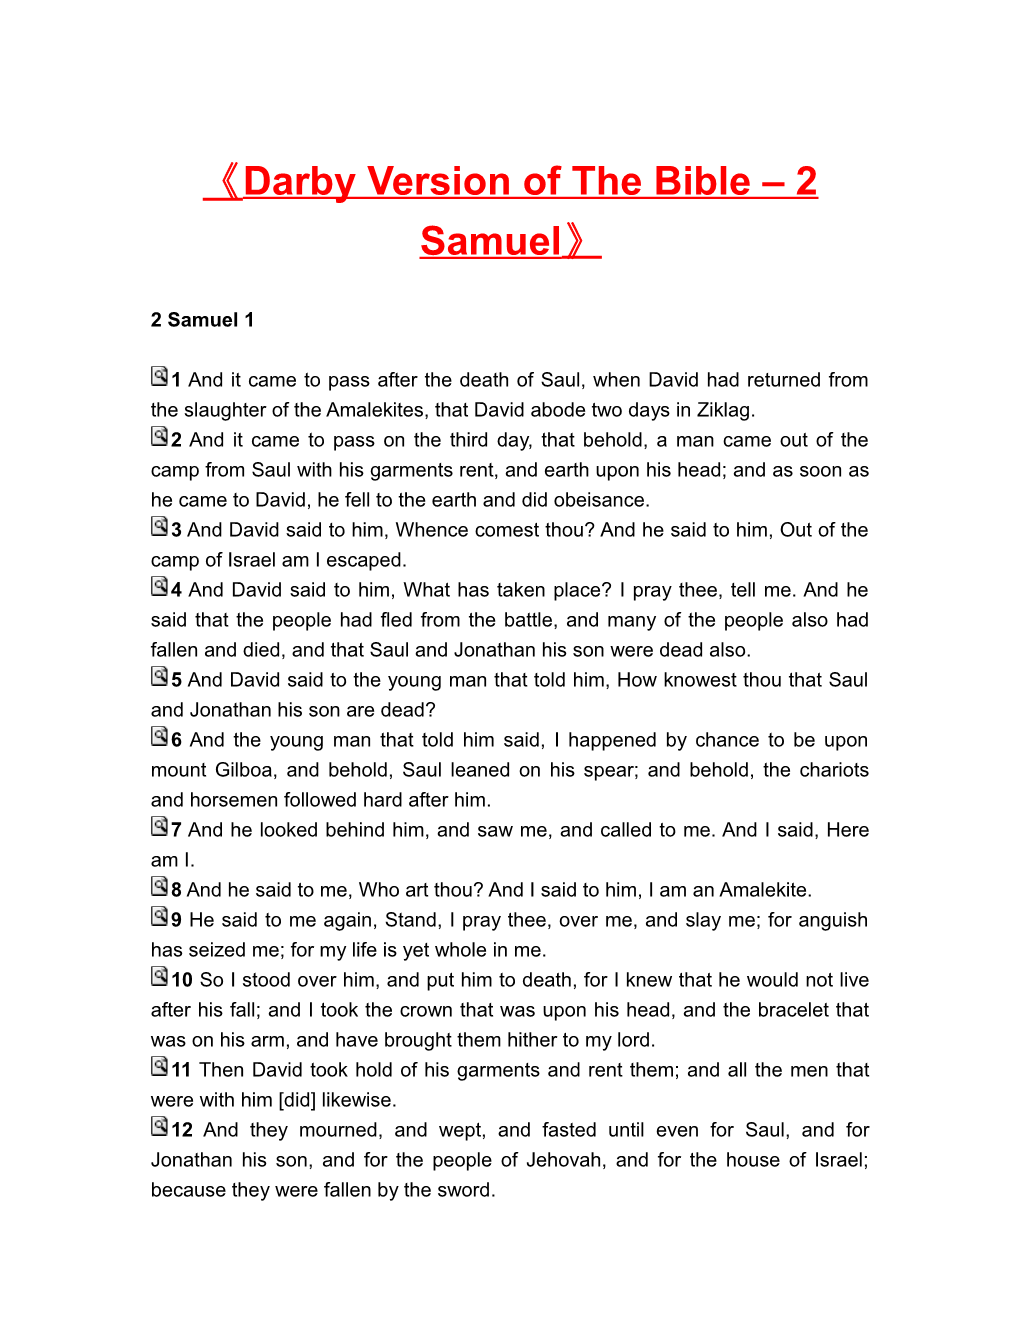 Darby Version of the Bible 2 Samuel